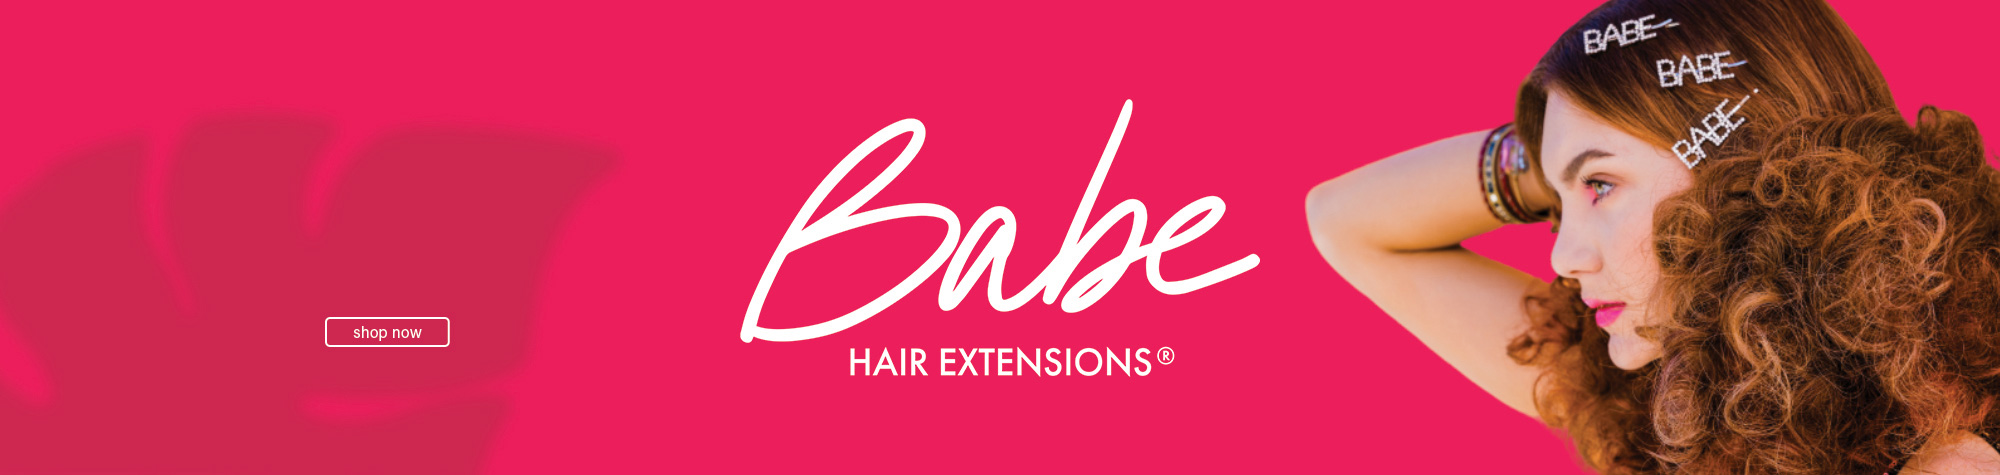 Babe Hair Extensions